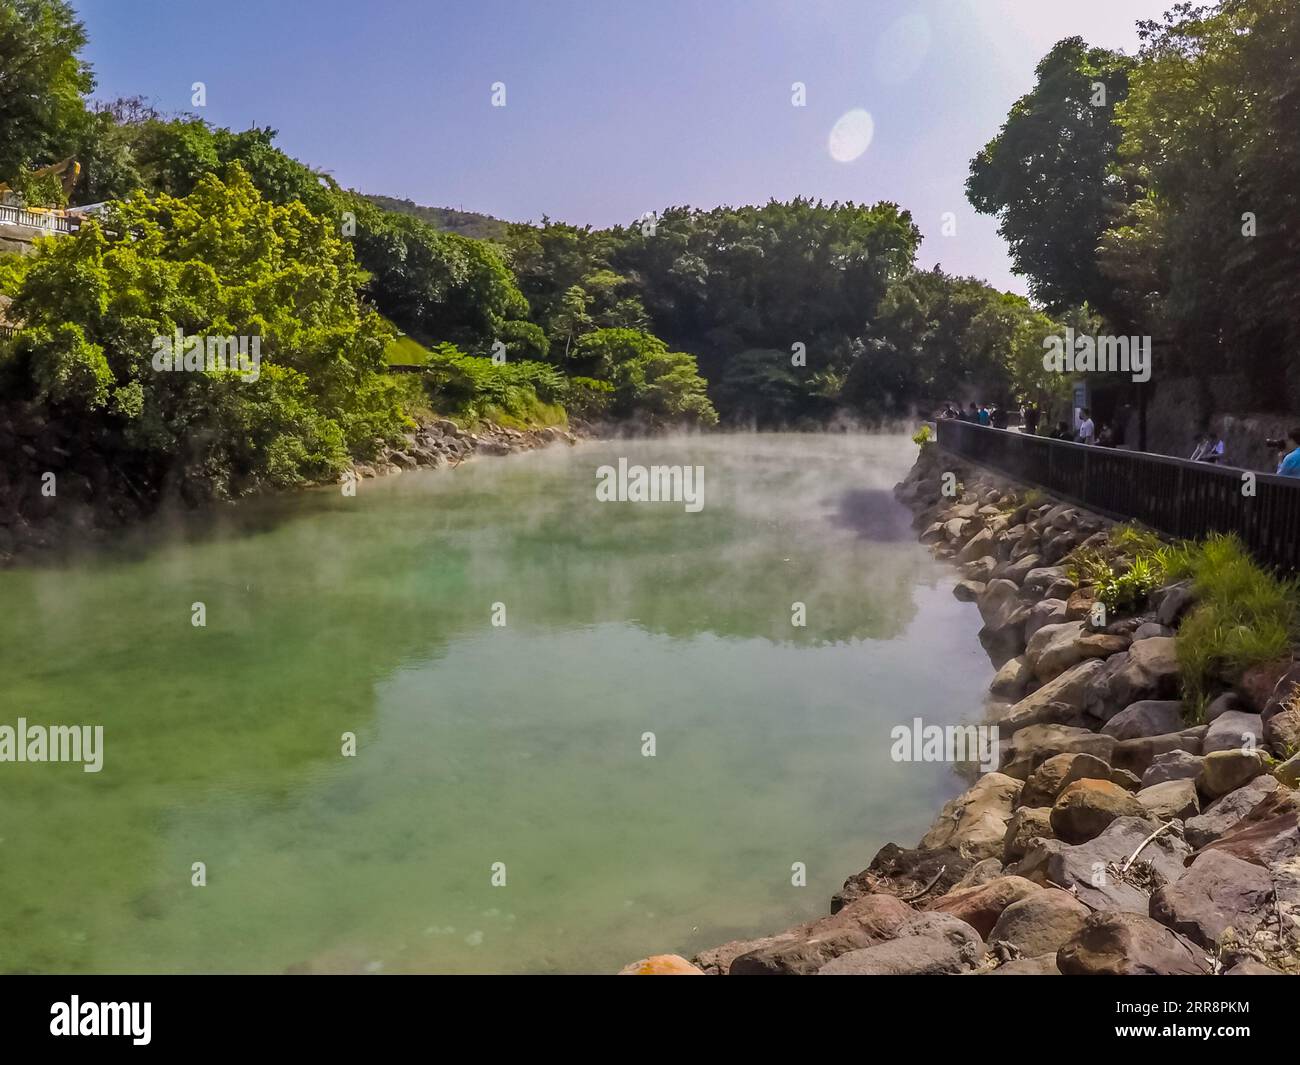 Beitou Thermal Valley, very well known famous Taiwan’s natural hot spring located in Beitou district, Taipei, Taiwan Stock Photo